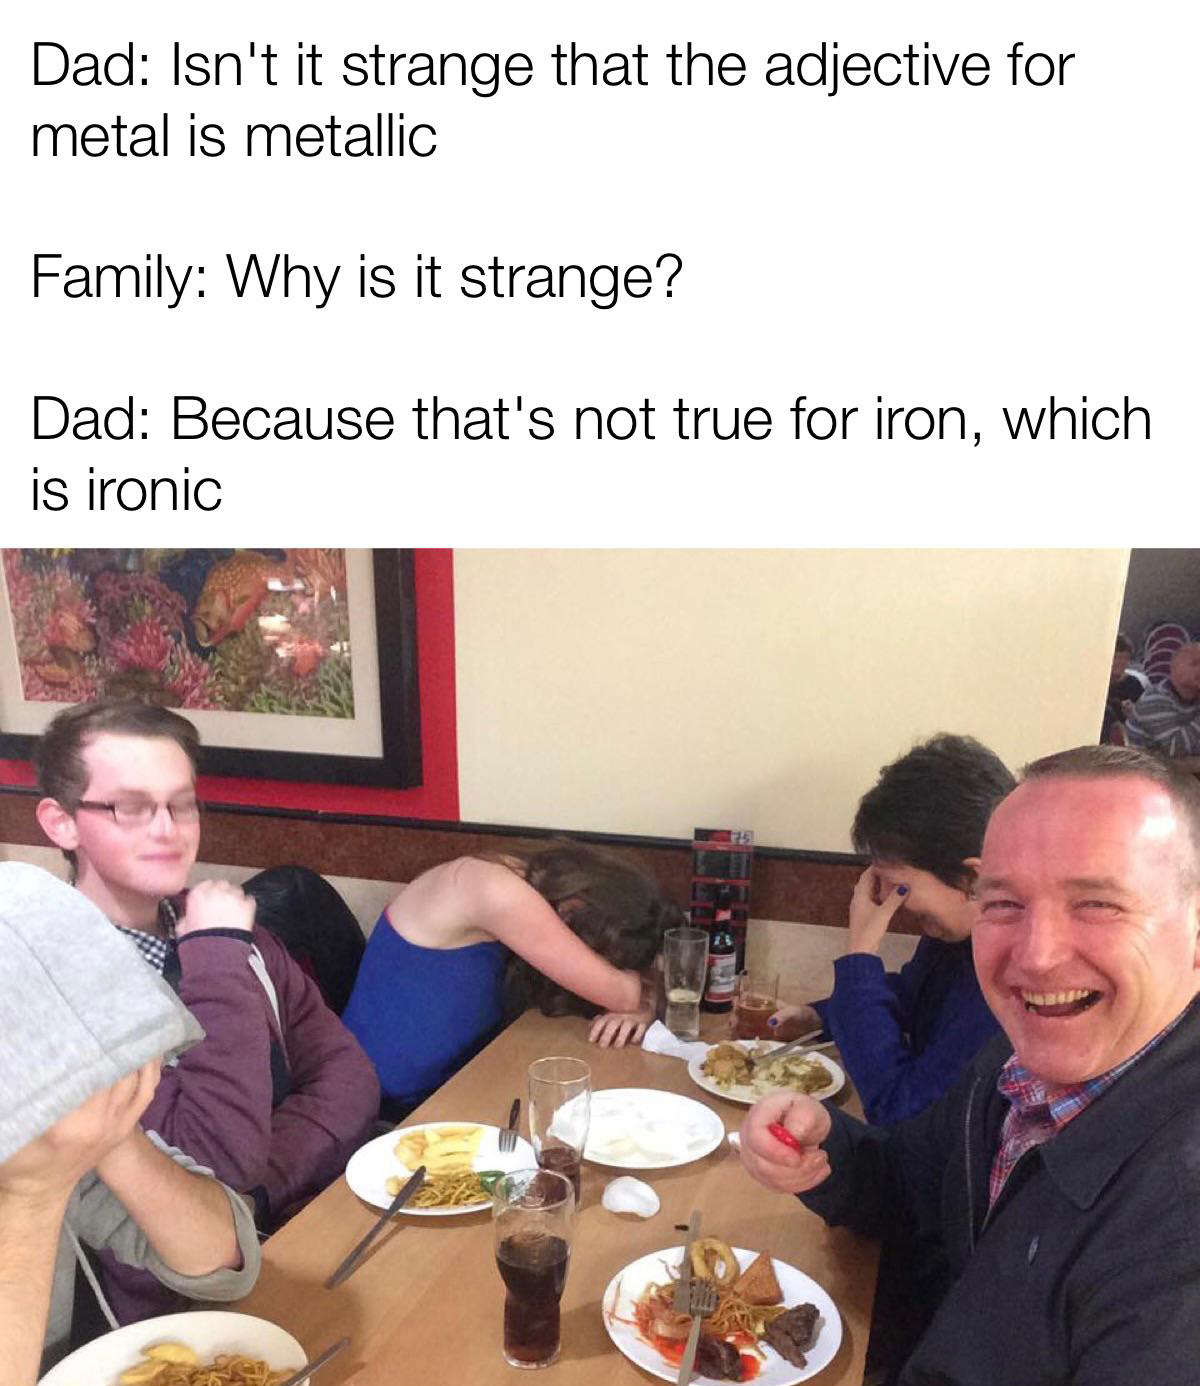 monday morning randomness - dank memes erectile dysfunction meme - Dad Isn't it strange that the adjective for metal is metallic Family Why is it strange? Dad Because that's not true for iron, which is ironic